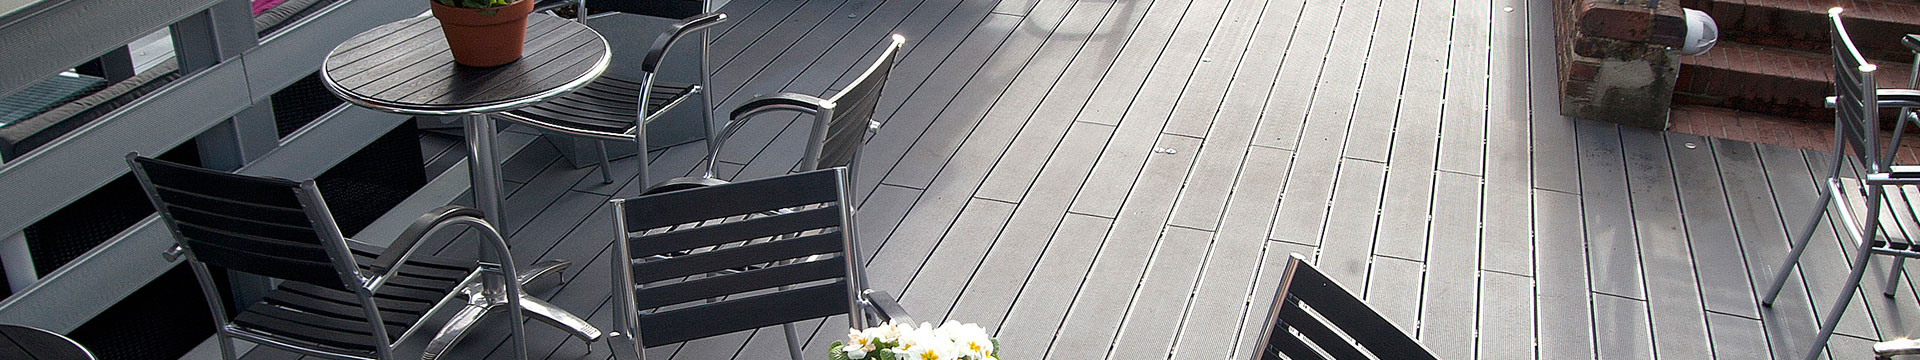 Composite decking with superior impact strength